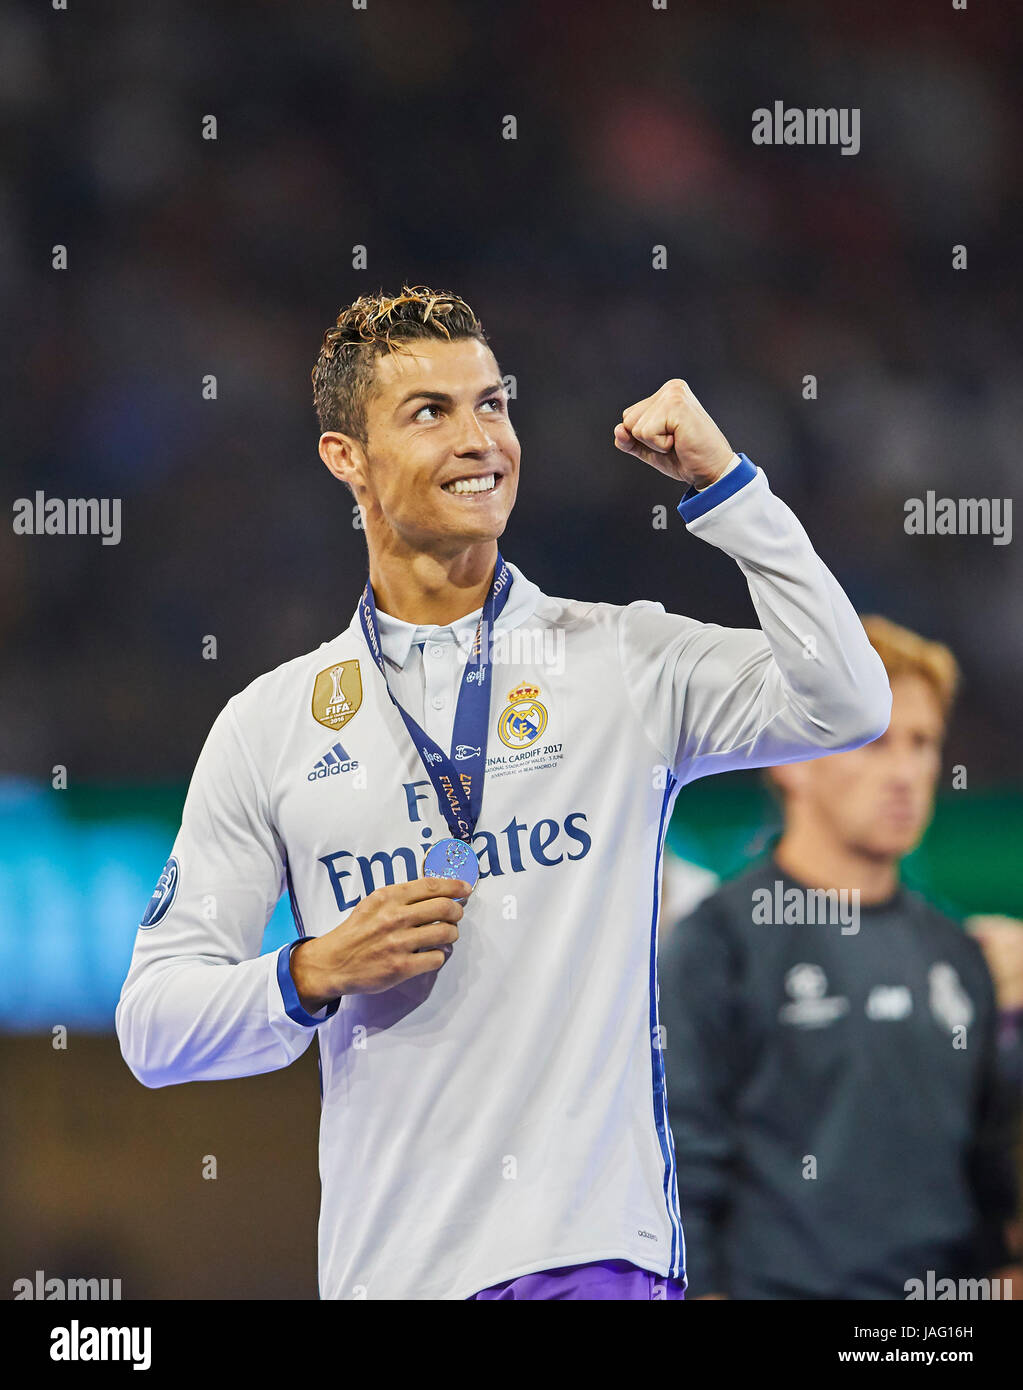 UEFA Champions League, Final, Cardiff, June 03 2017 Cristiano RONALDO, Real  Madrid 7 with Gold Medal celebrates with the trophy REAL MADRID - JUVENTU  Stock Photo - Alamy